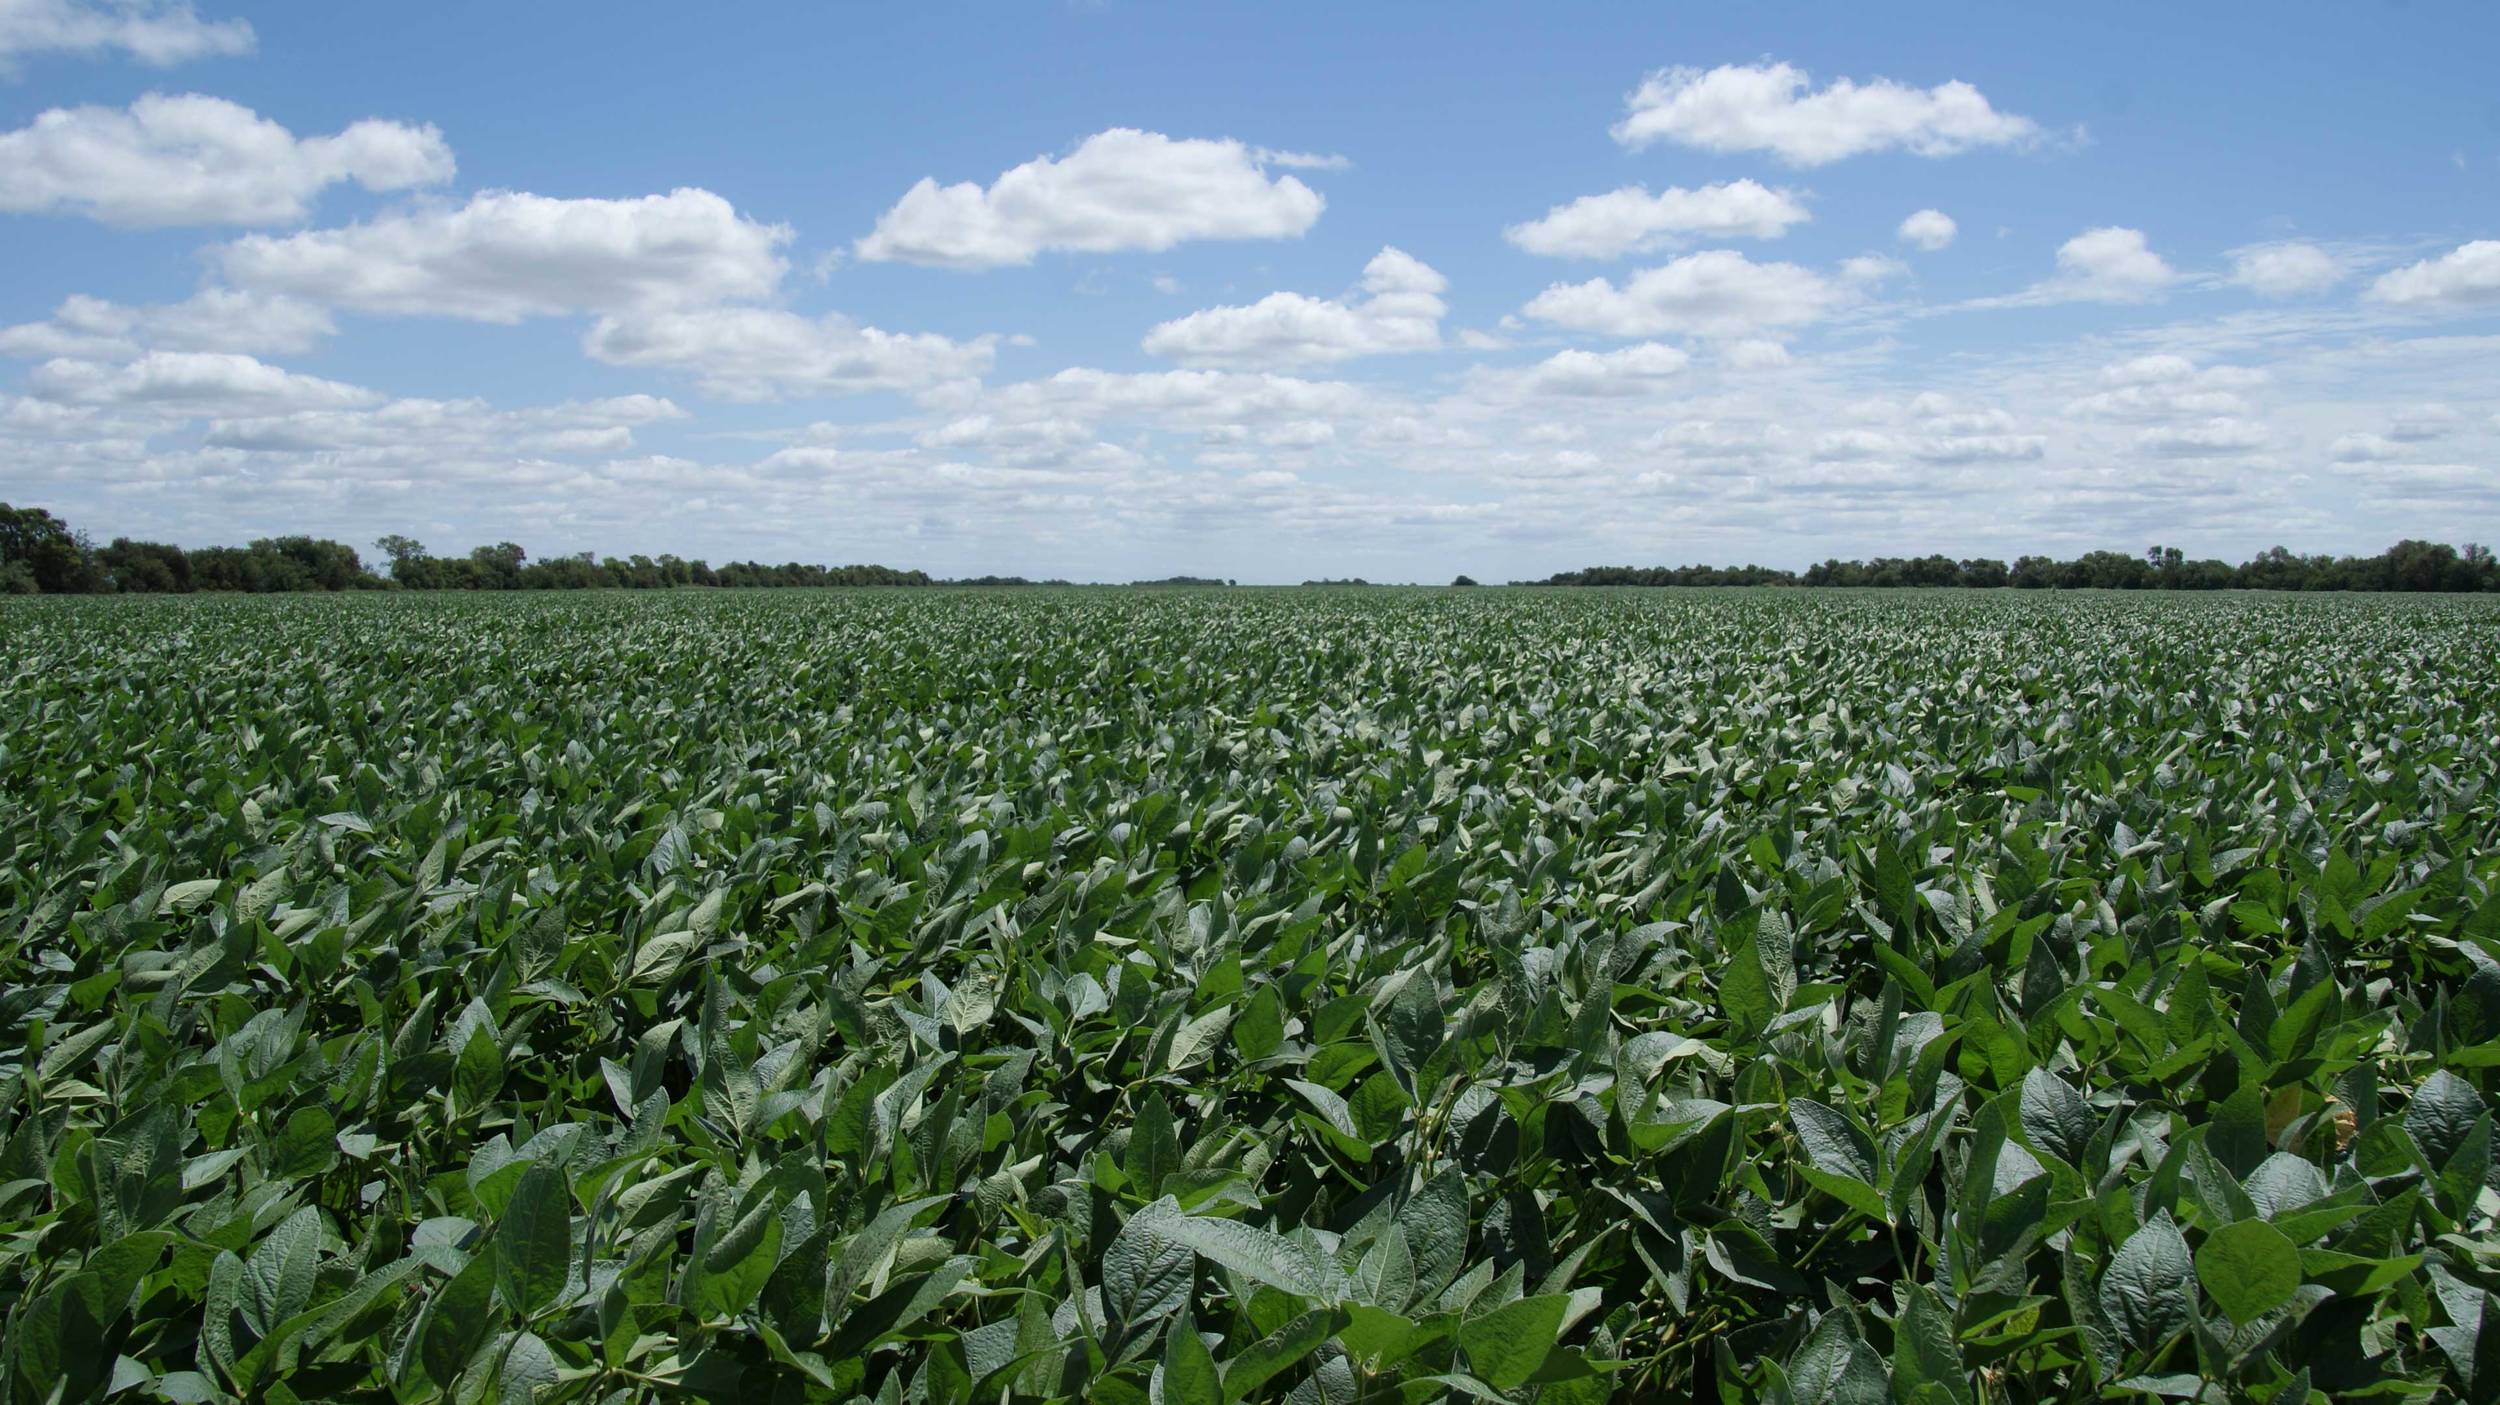 In Argentina the climatic conditions are ideal for the cultivation of various plant species.